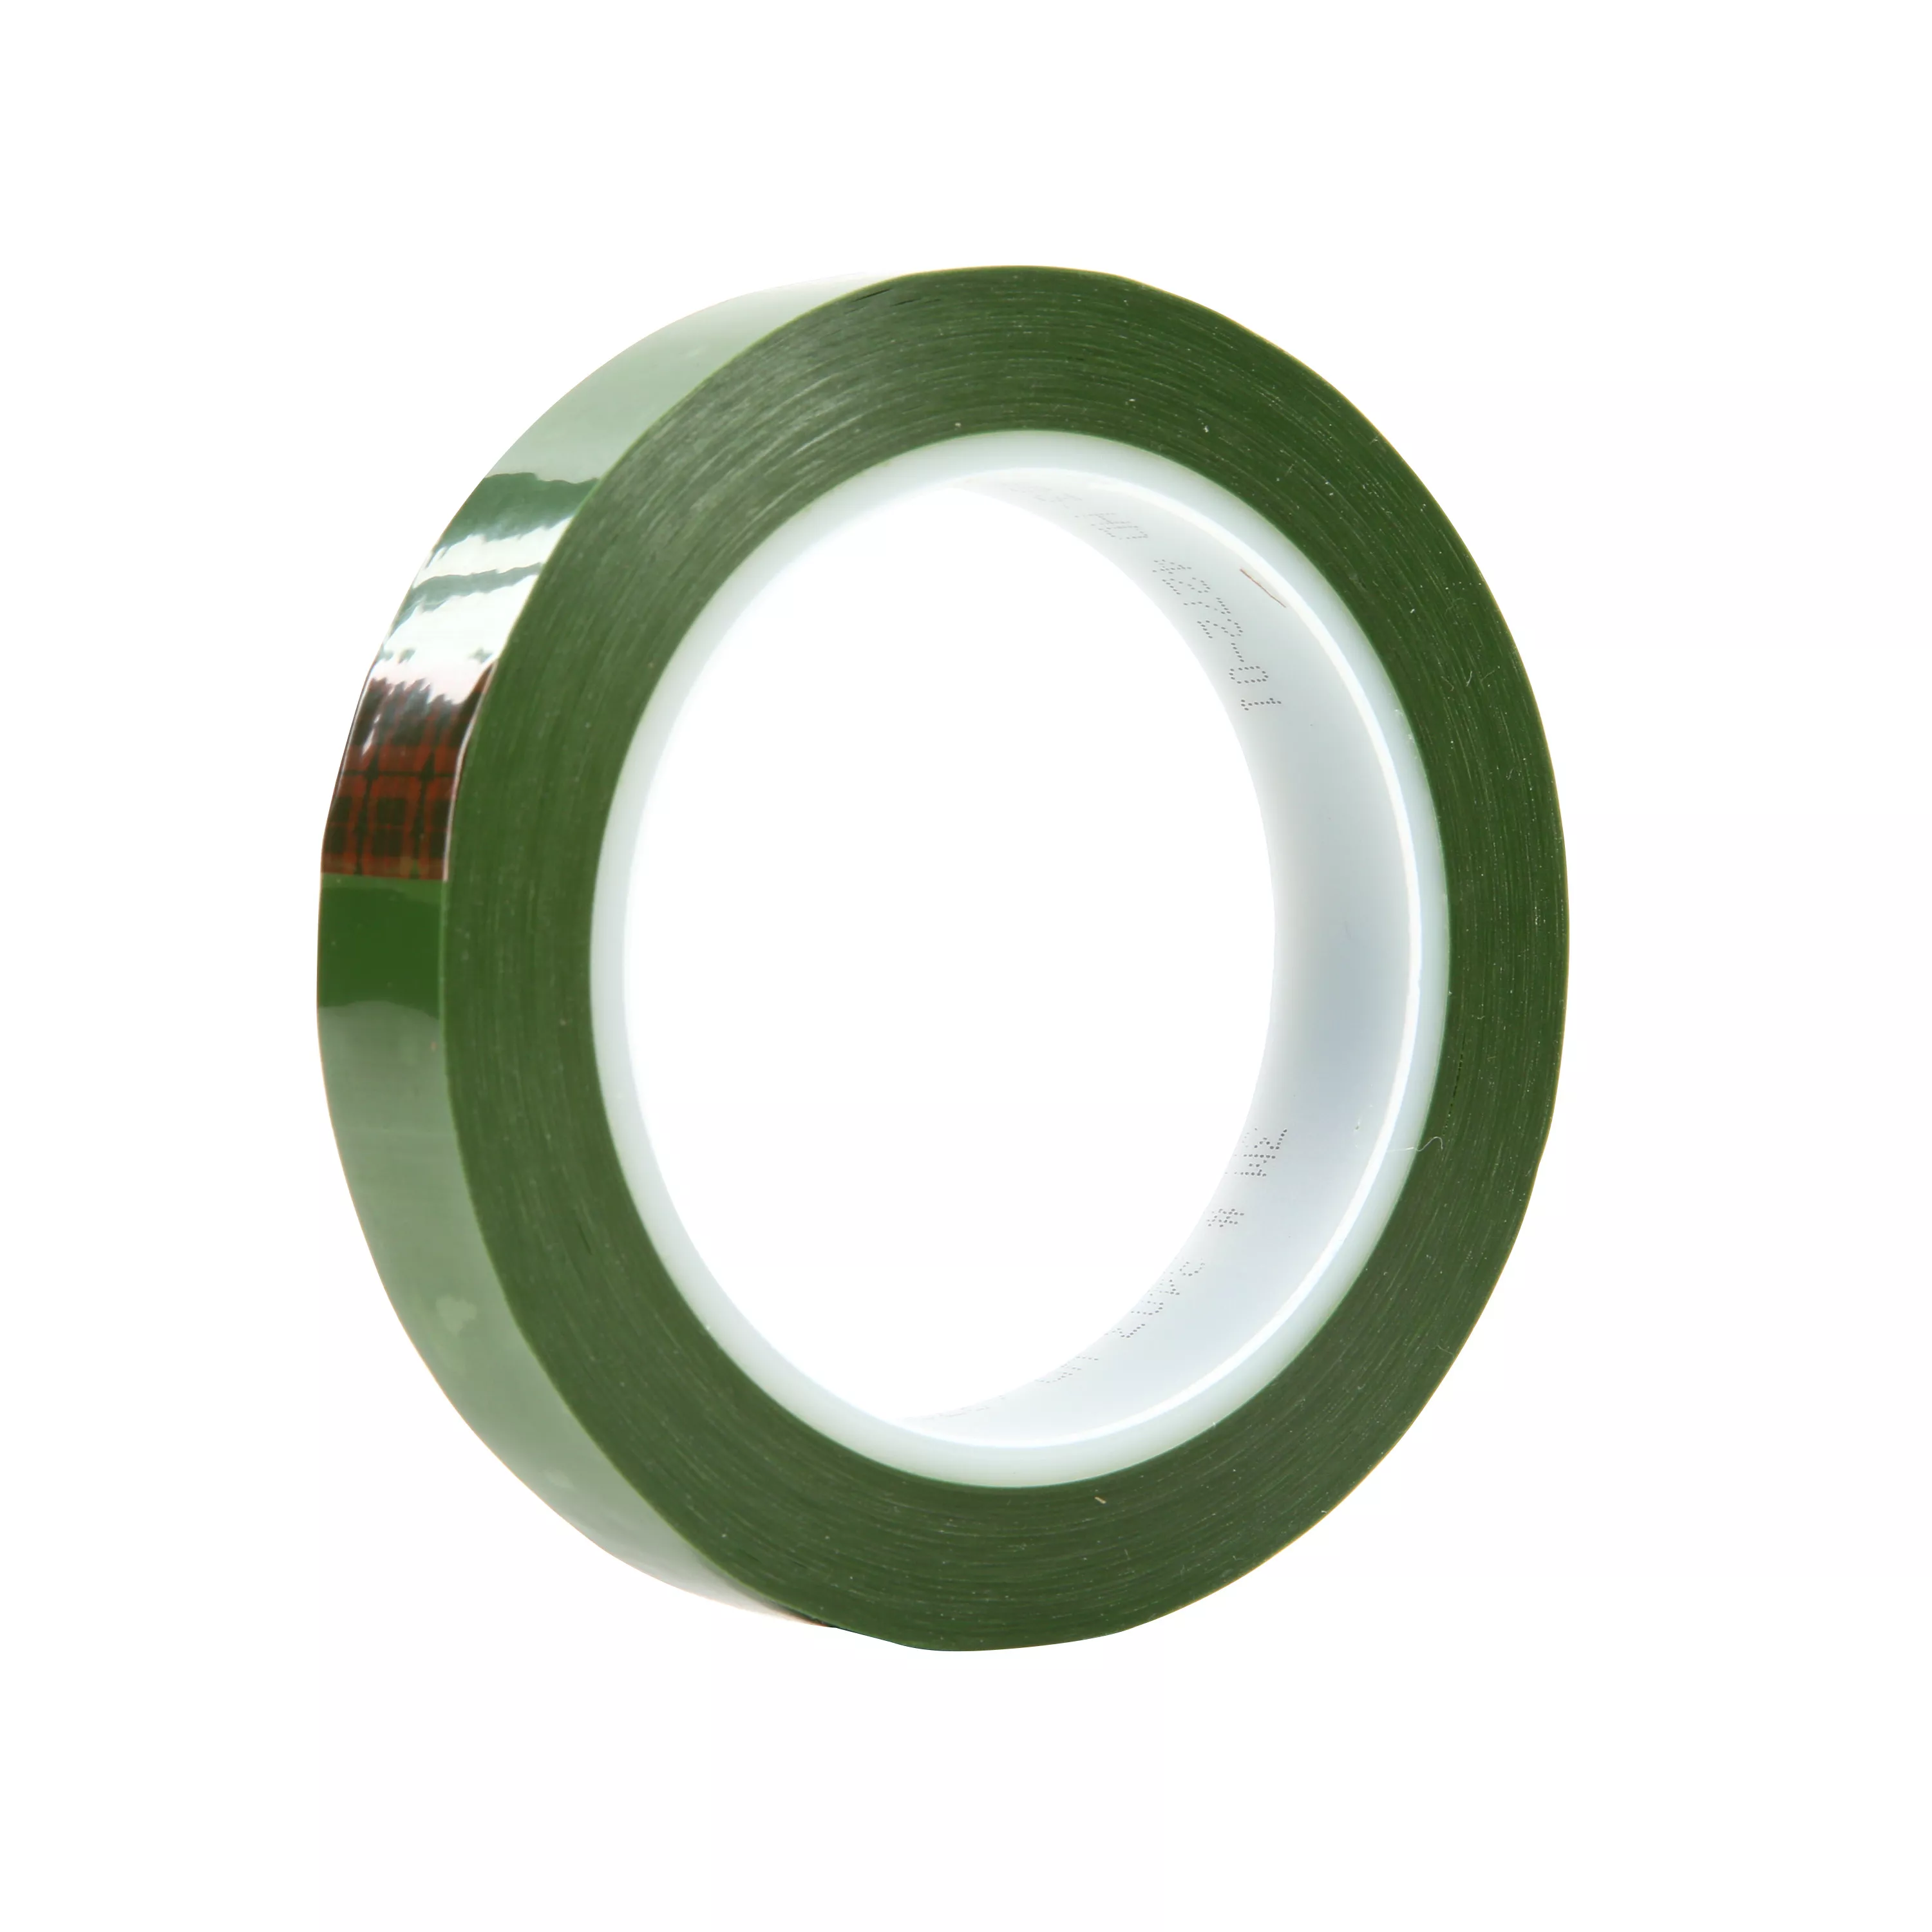 3M™ Polyester Tape 8403, Green, 3/4 in x 72 yd, 2.4 mil, 48 Roll/Case